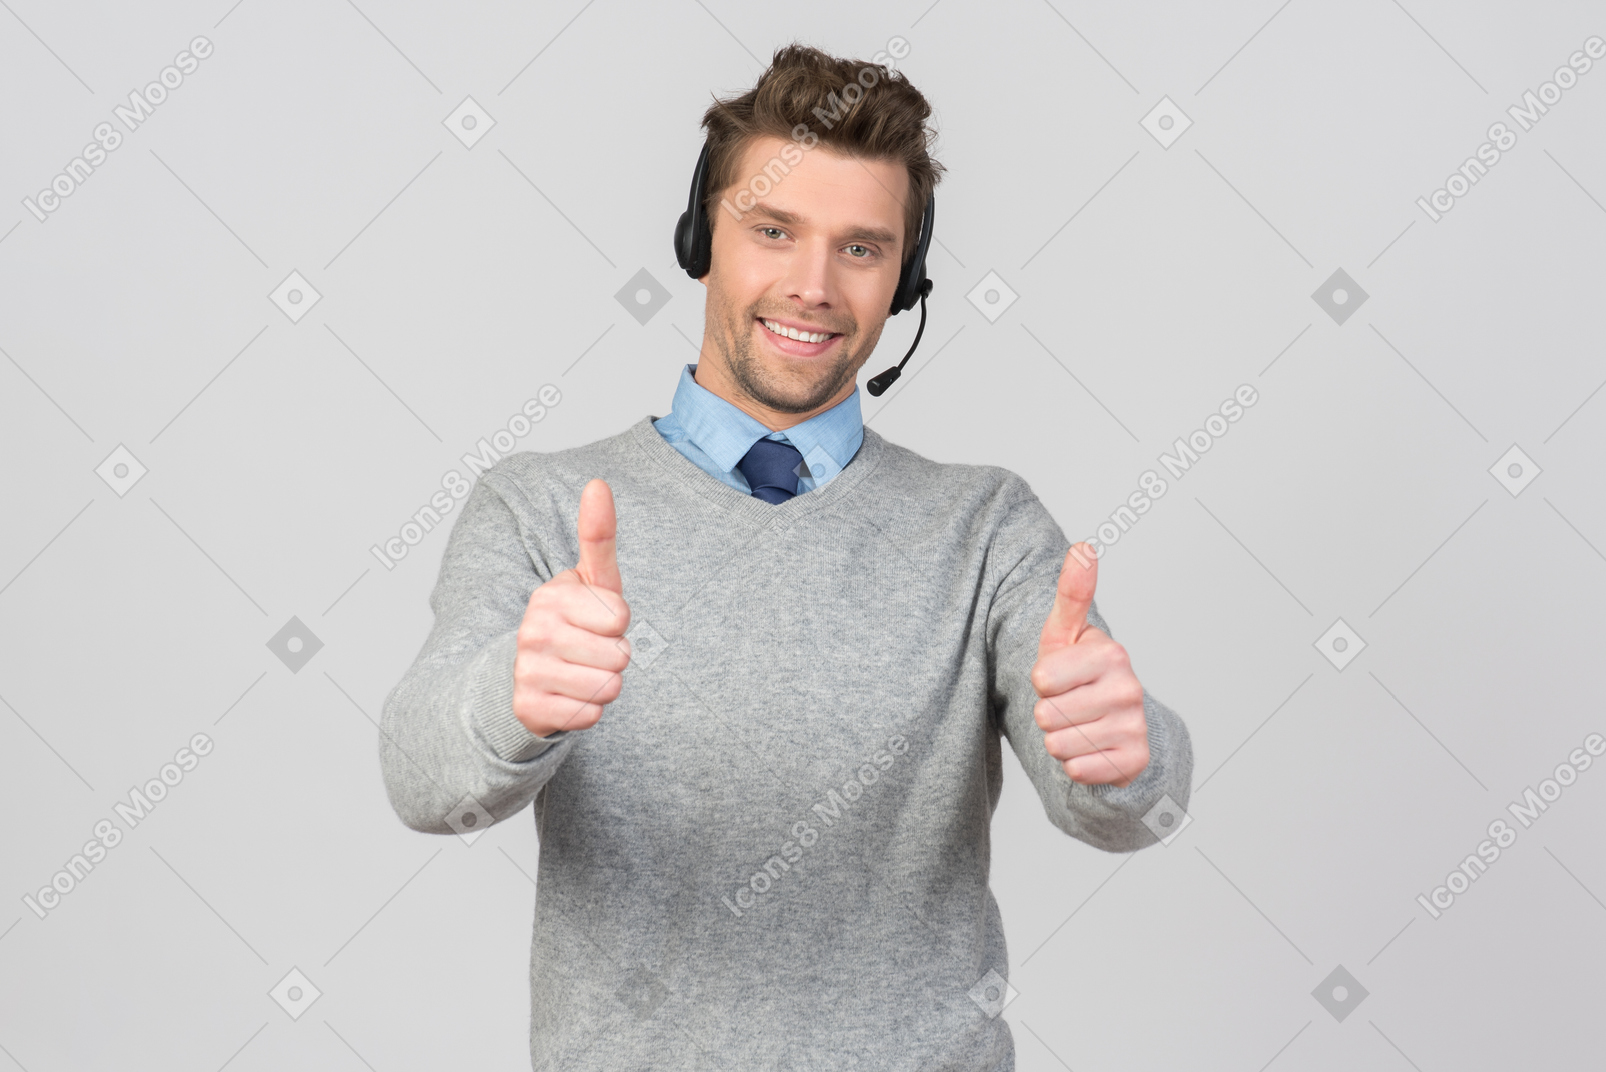 Call center agent showing thumbs up with both hands